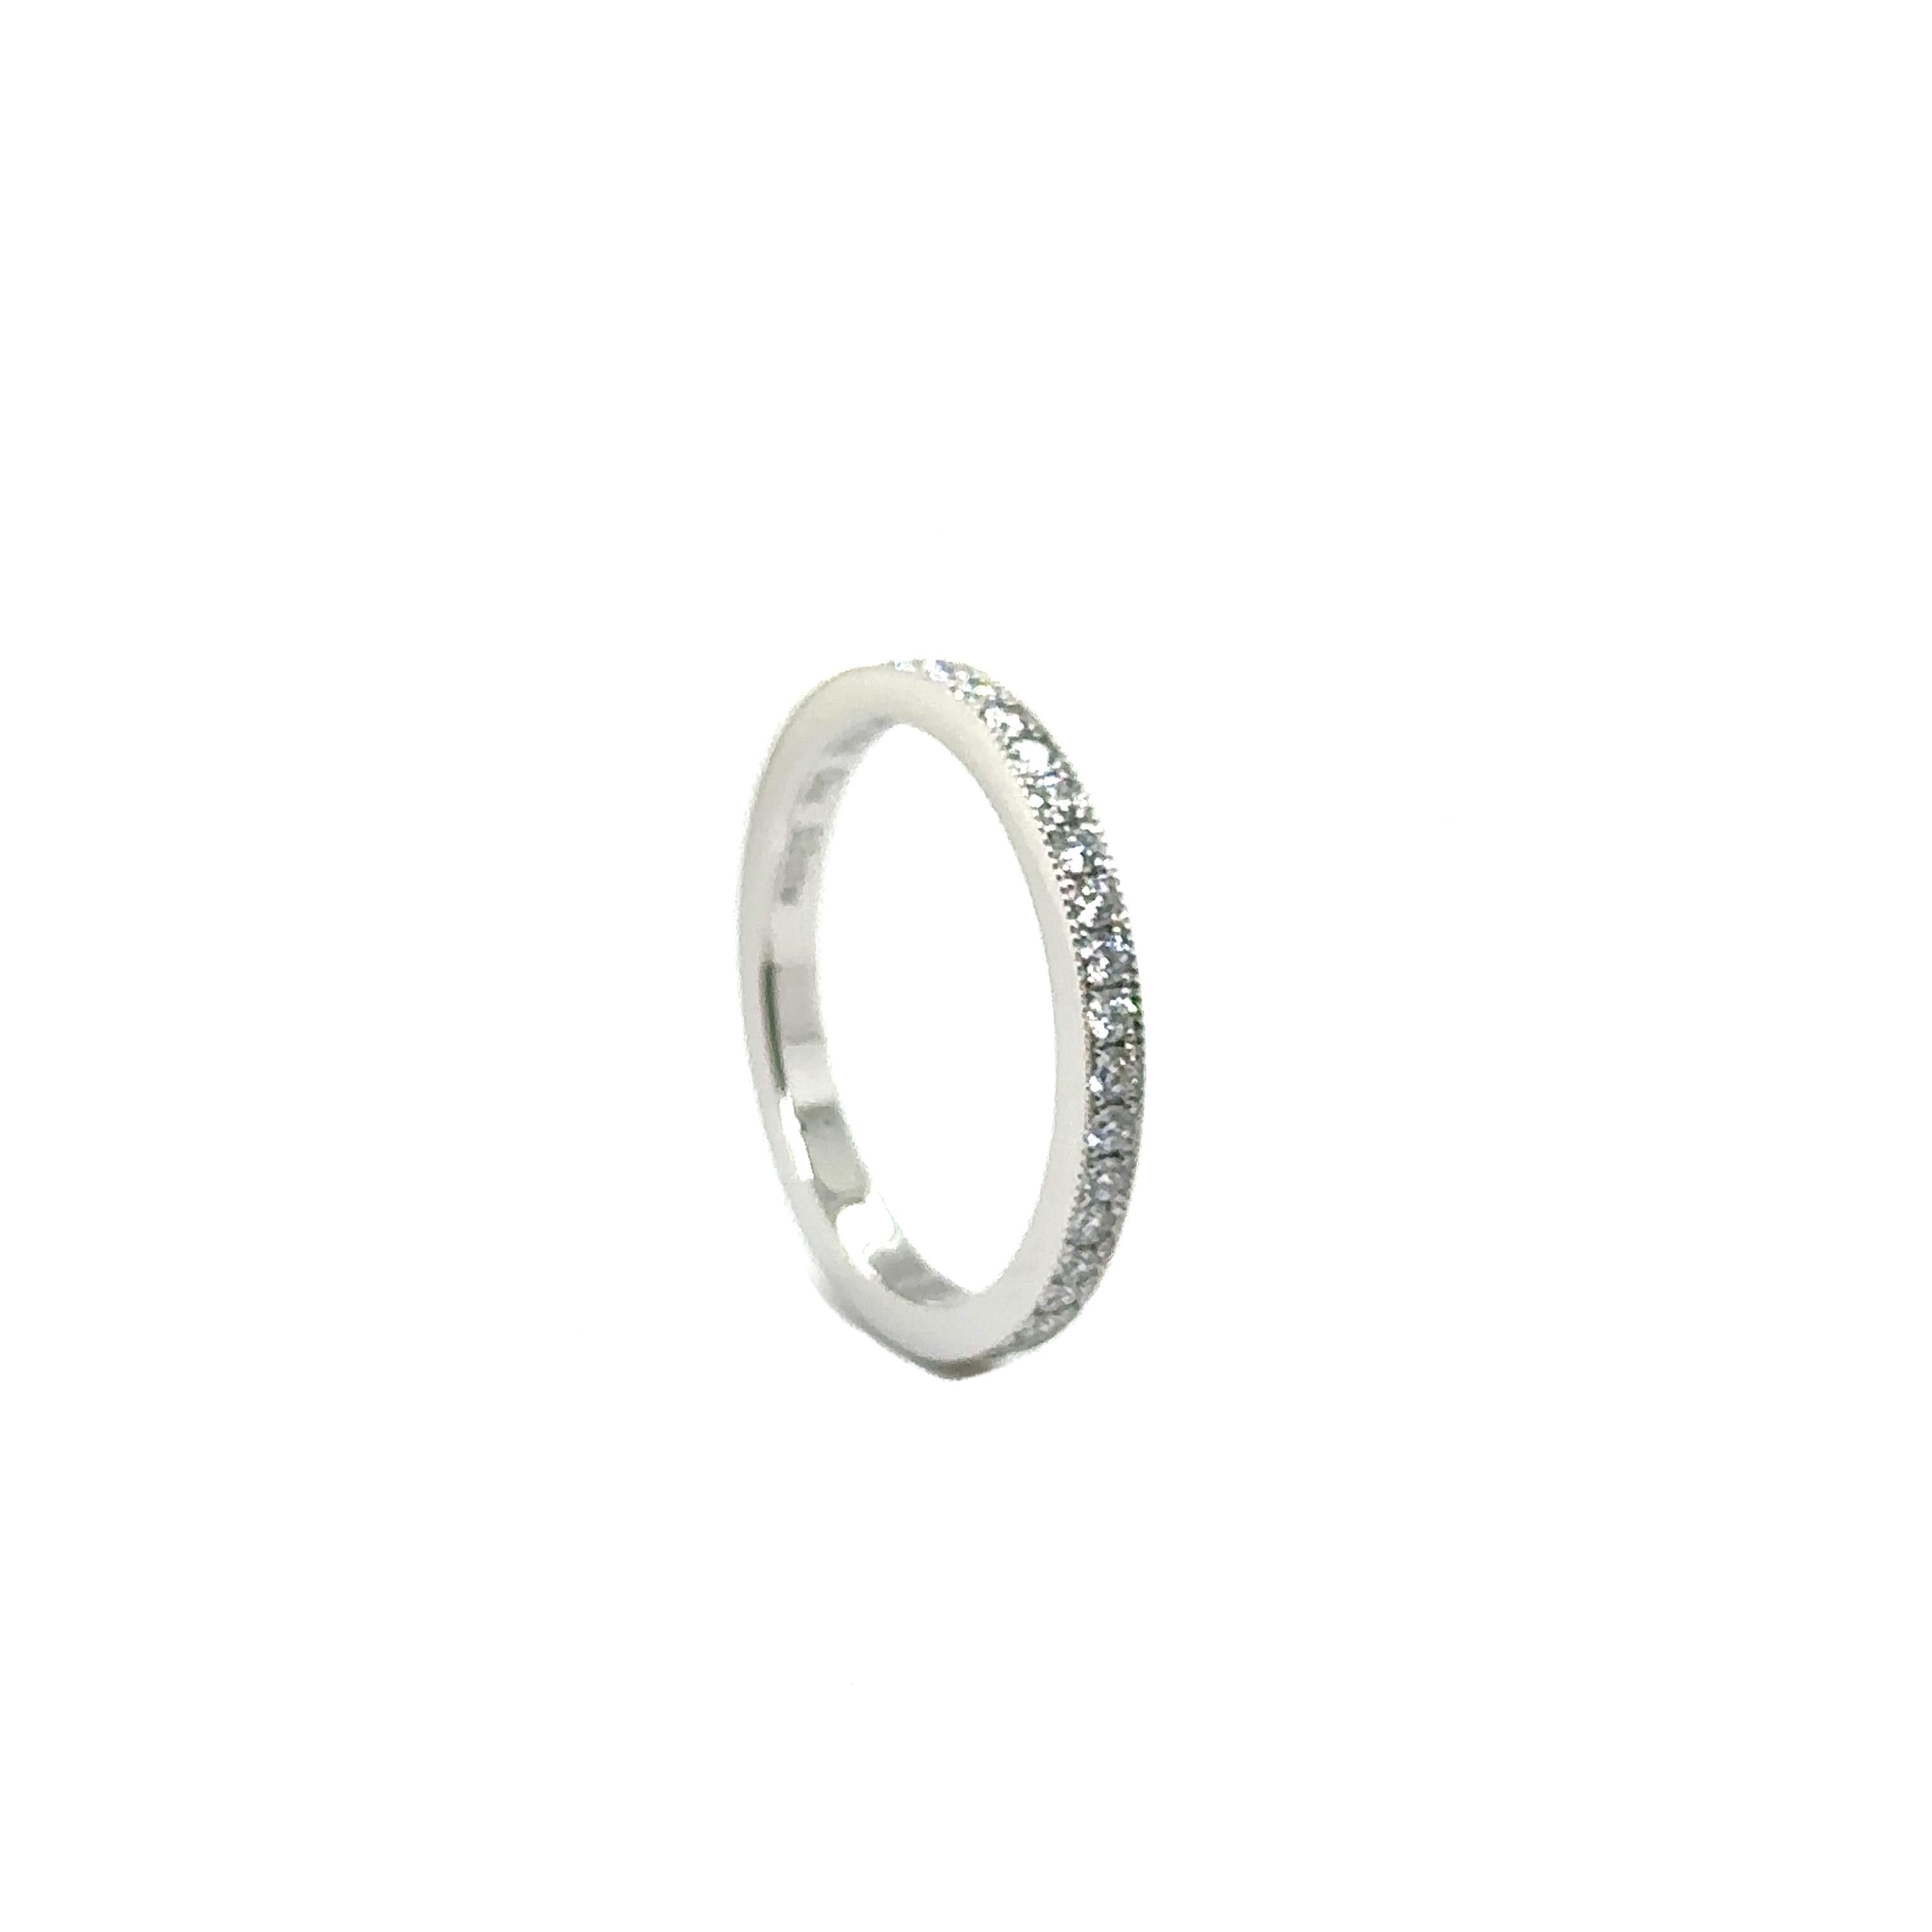 PLATINUM WEDDING BAND with 0.52 CT DIAMONDS
Metal: Platinum
Diamond Info: 
39 - G/VS ROUND BRILLIANT DIAMONDS
SETTING MICRO PAVE BRIGHT CUT WITH MILLI GRAIN
Total Ct Weight:  0.52 cwt.
Item Weight: 3.33 gm
Ring Size:  6 1/4  (Can be sized up to 6